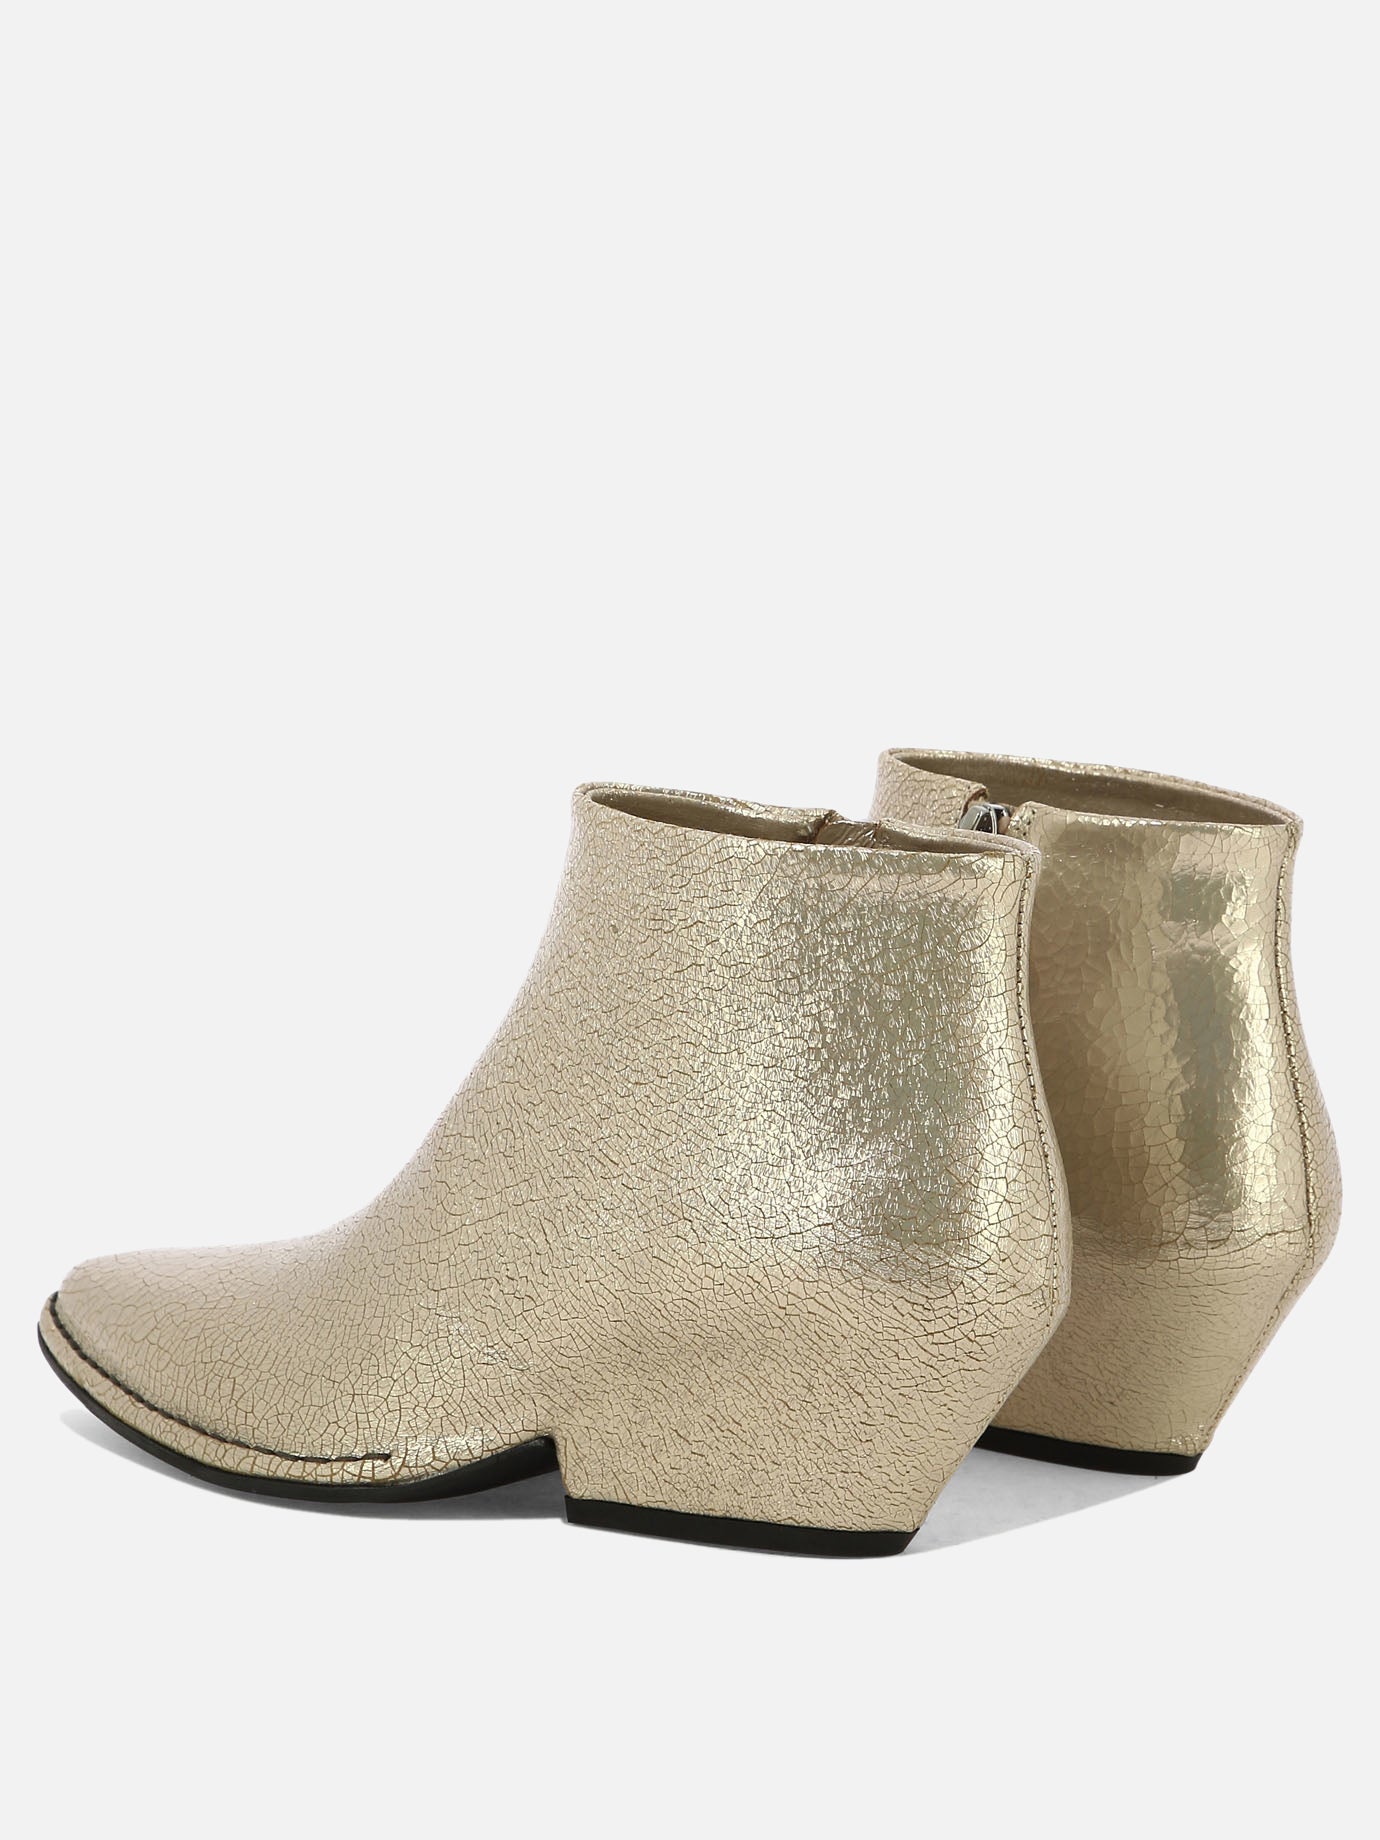 "Crio" ankle boots